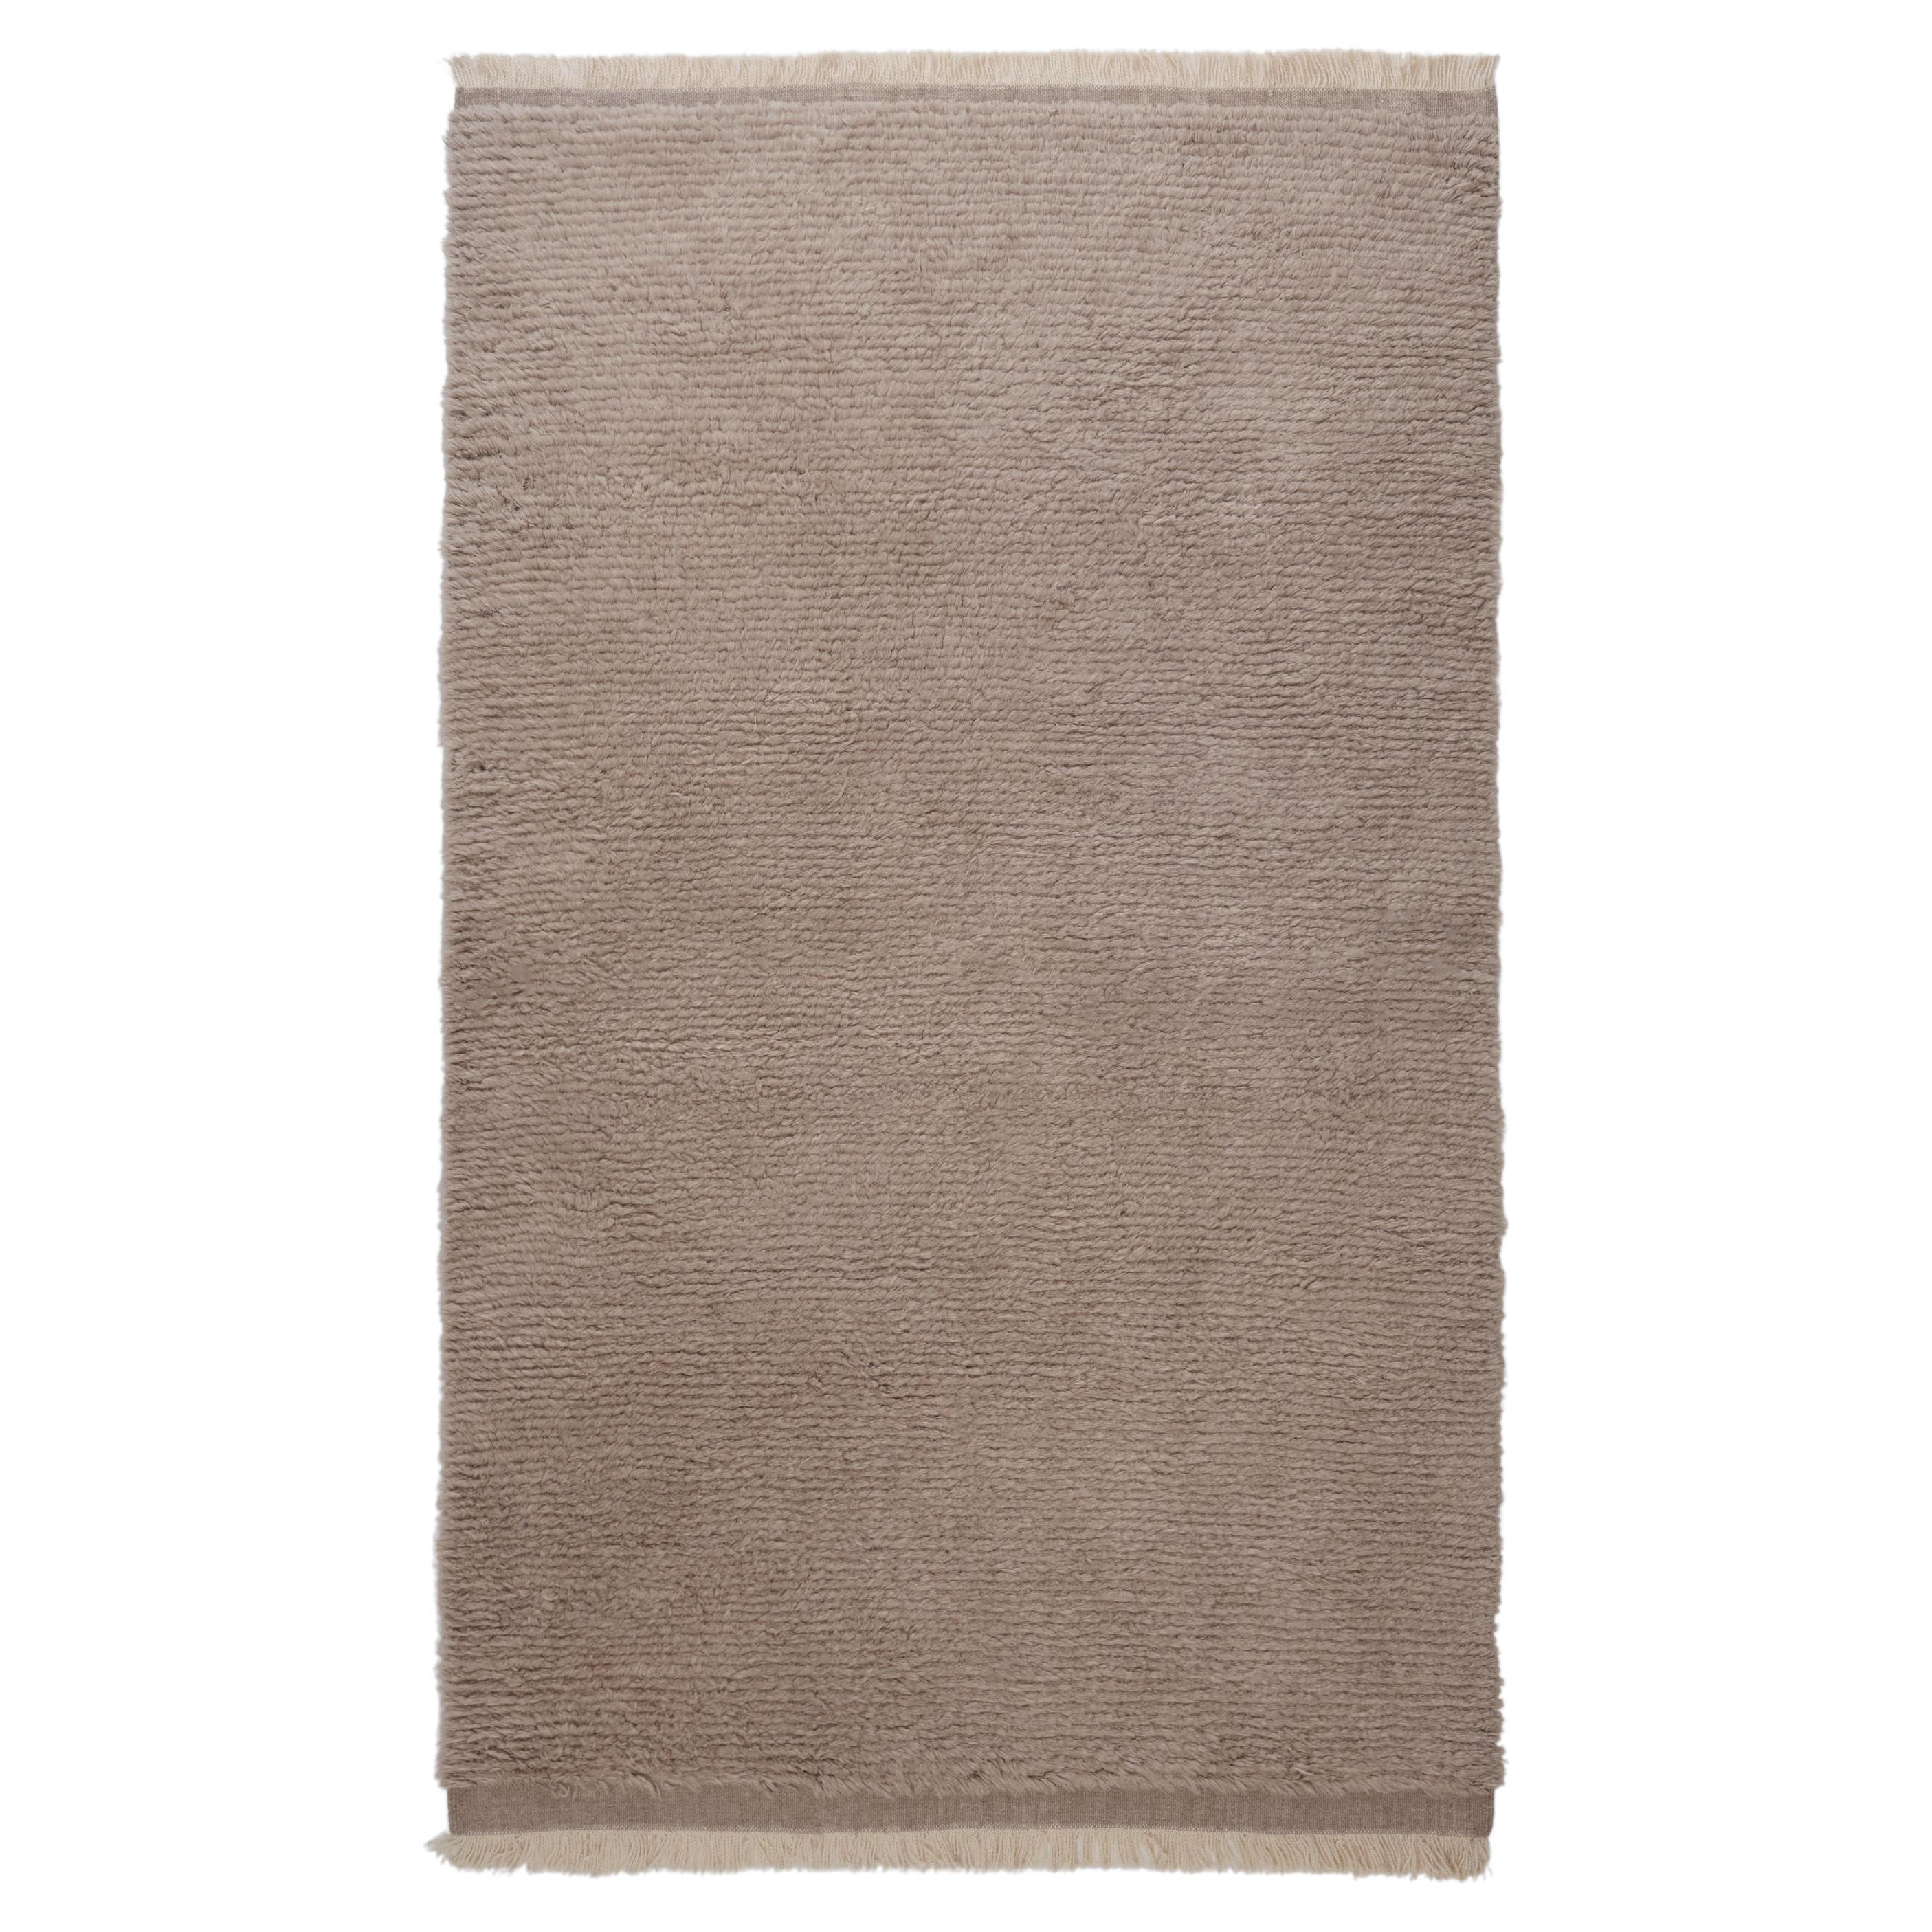 The Forsyth Woolly Shag Rug - Short Pile, Taupe, 8x10 For Sale